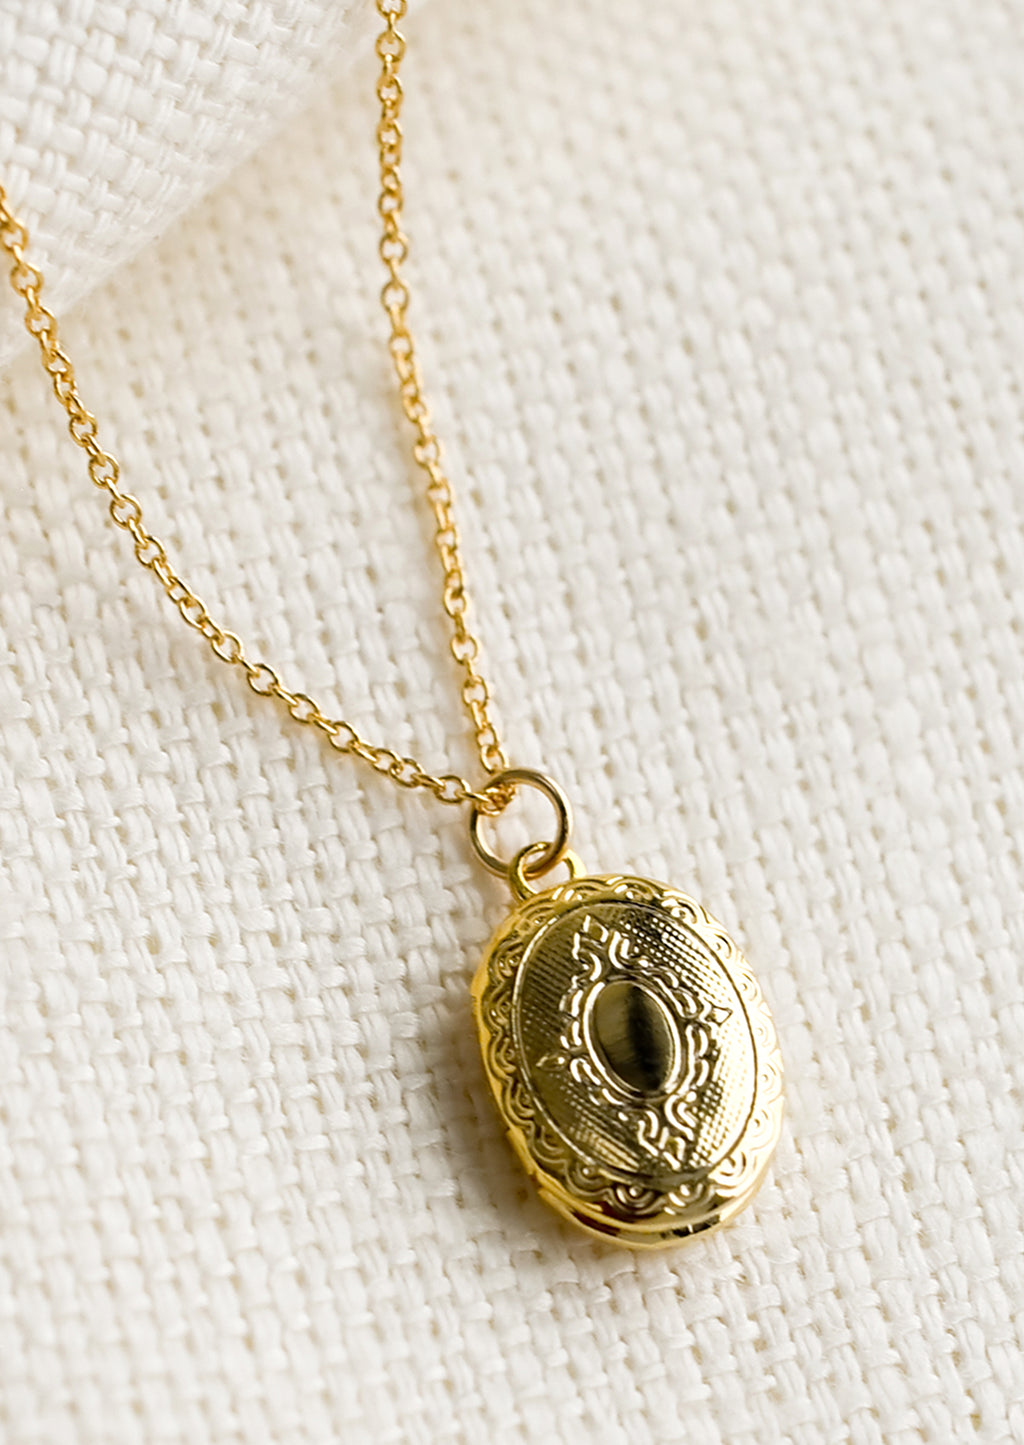 1: A oval shaped locket necklace with antique inspired engraving.